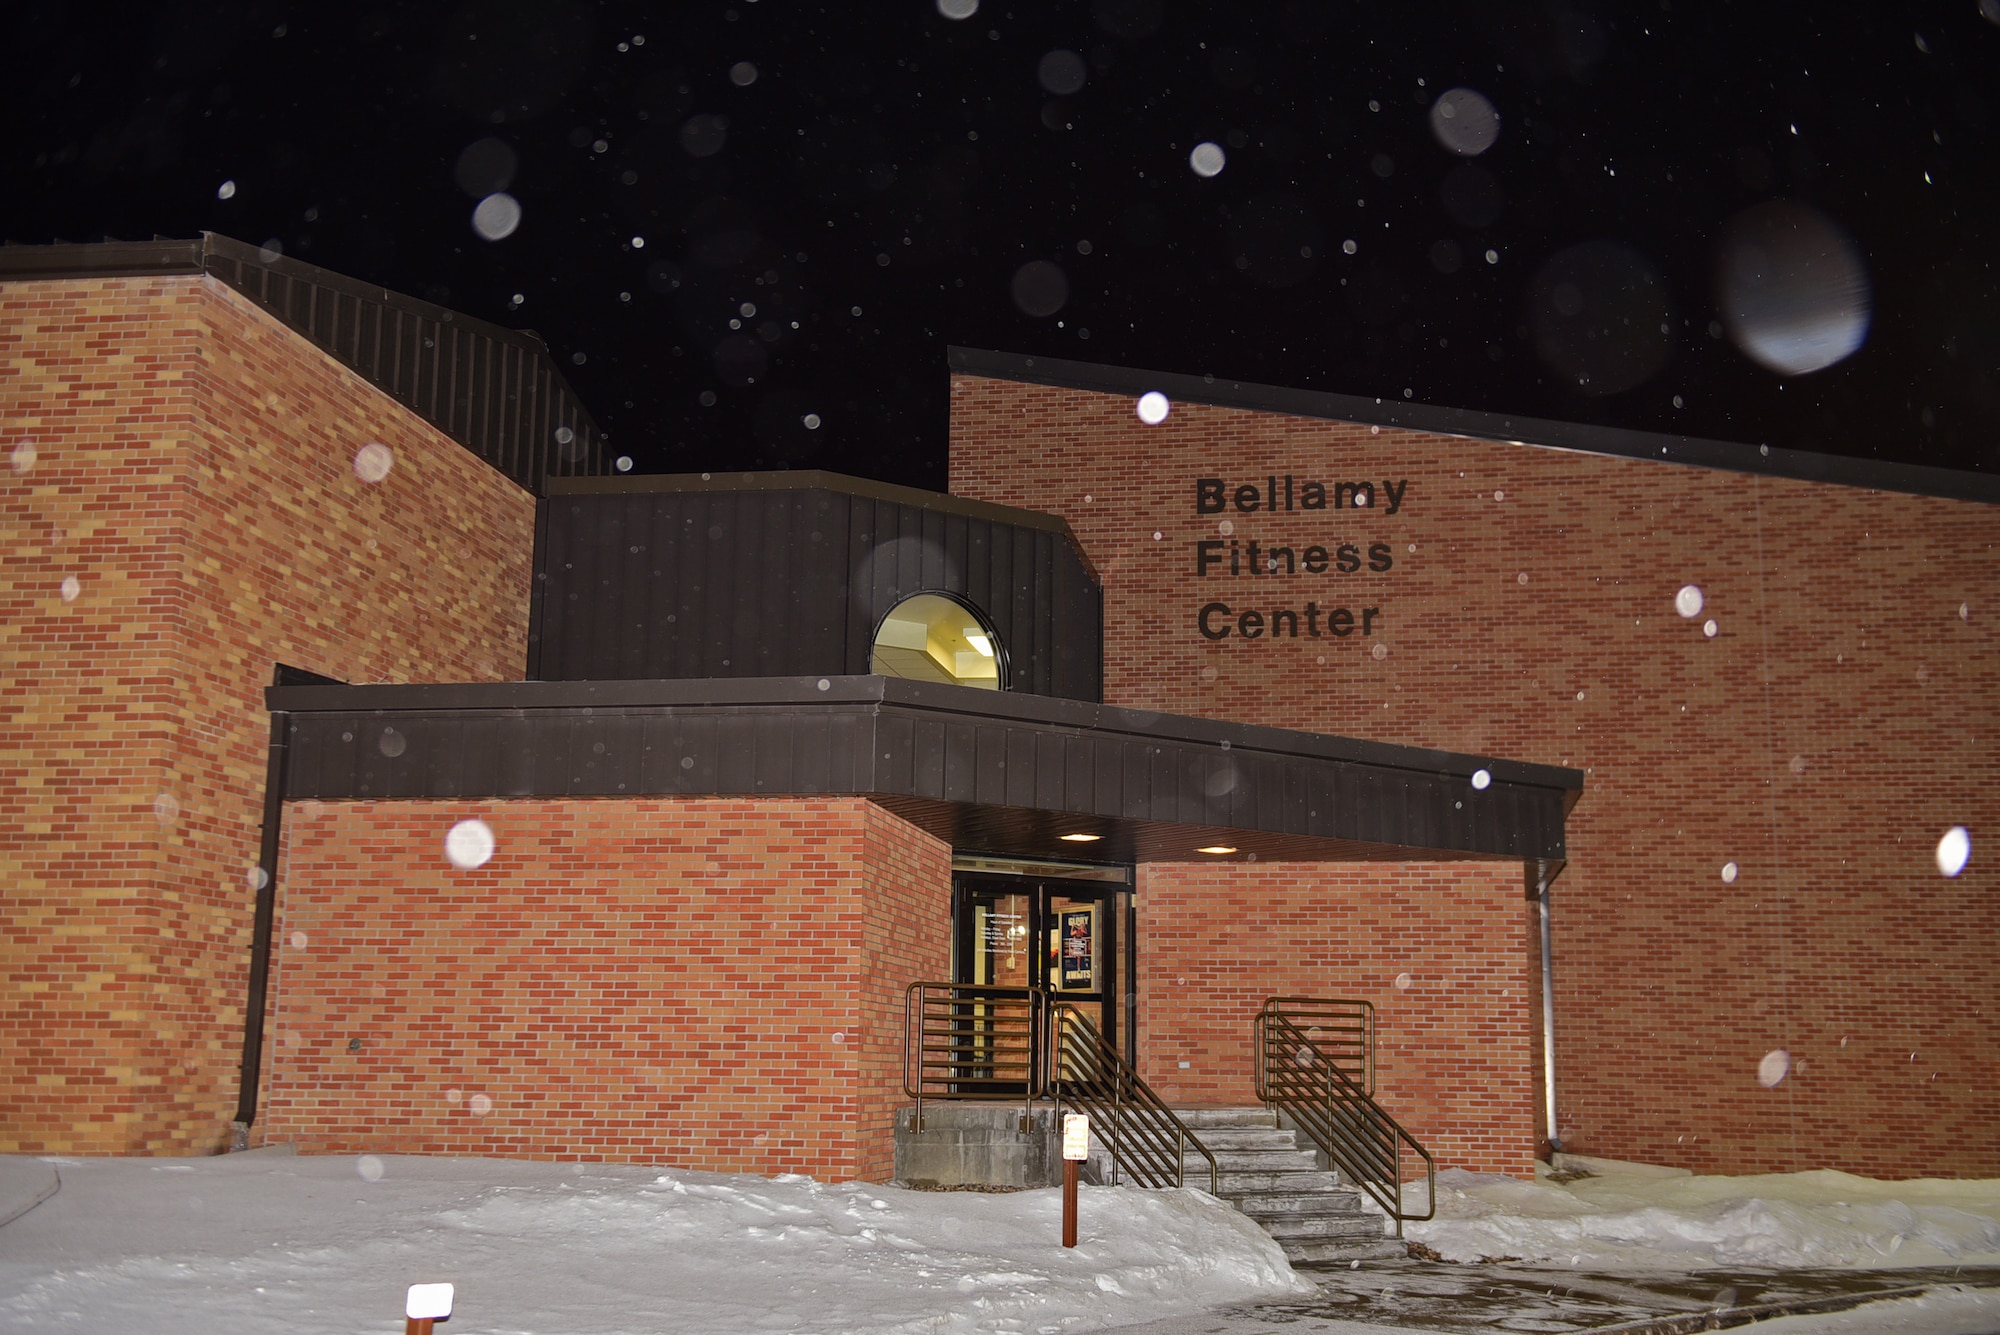 The Bellamy Fitness Center waits for patrons to walk through its doors on a snowy night at Ellsworth Air Force Base, S.D., Jan. 10, 2017. The fitness center is open 24 hours a day and access is available to all military members, spouses and dependents. (U.S. Air Force photo by Airman 1st Class James L. Miller)